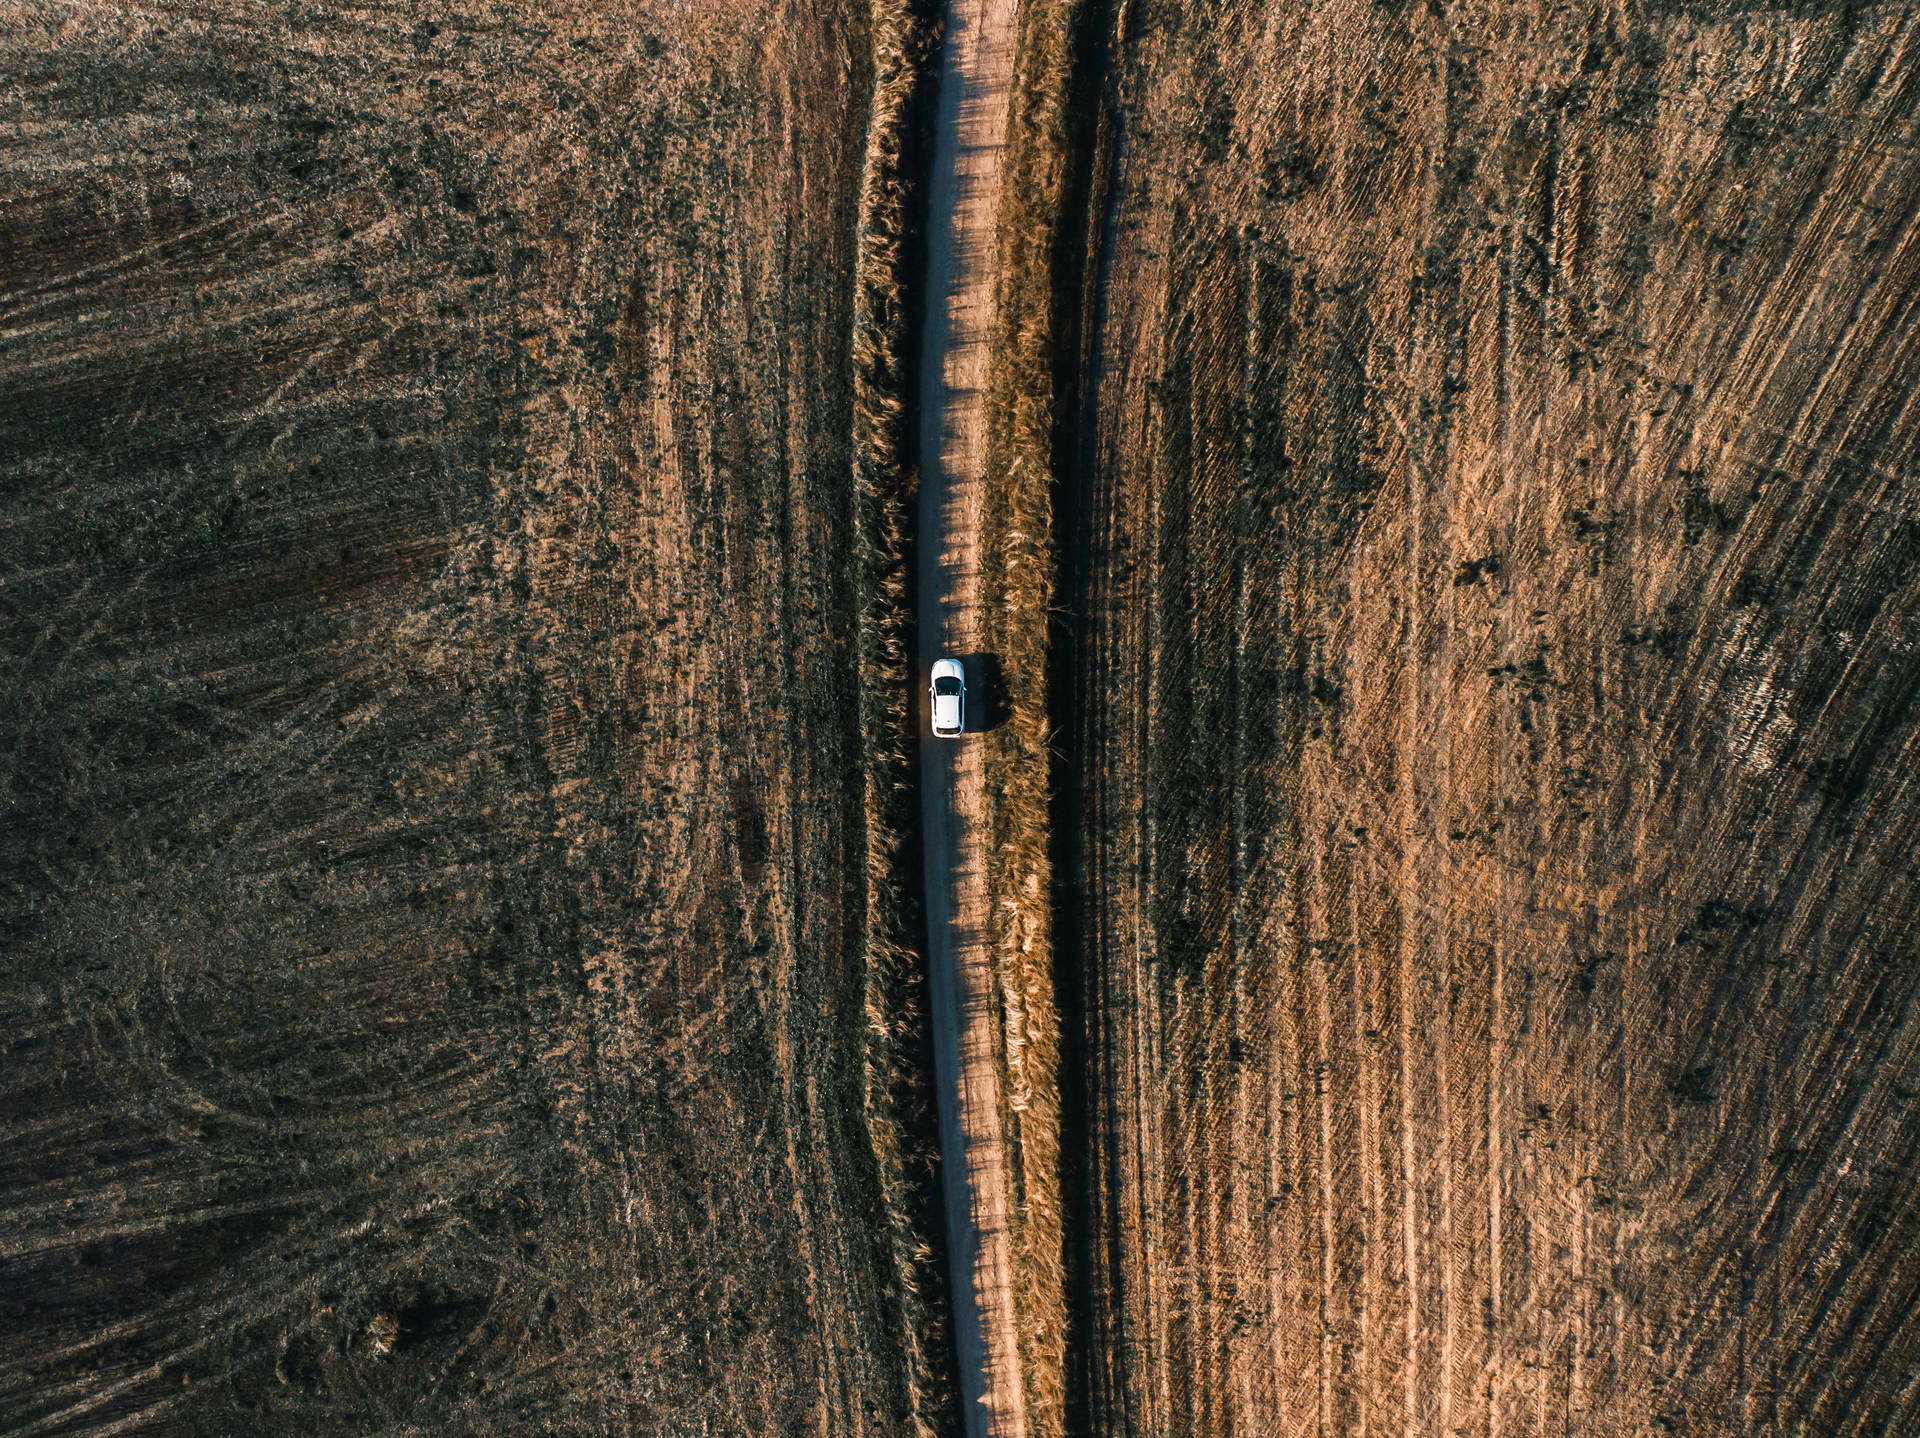 Hd Car On Dirt Aerial View Background